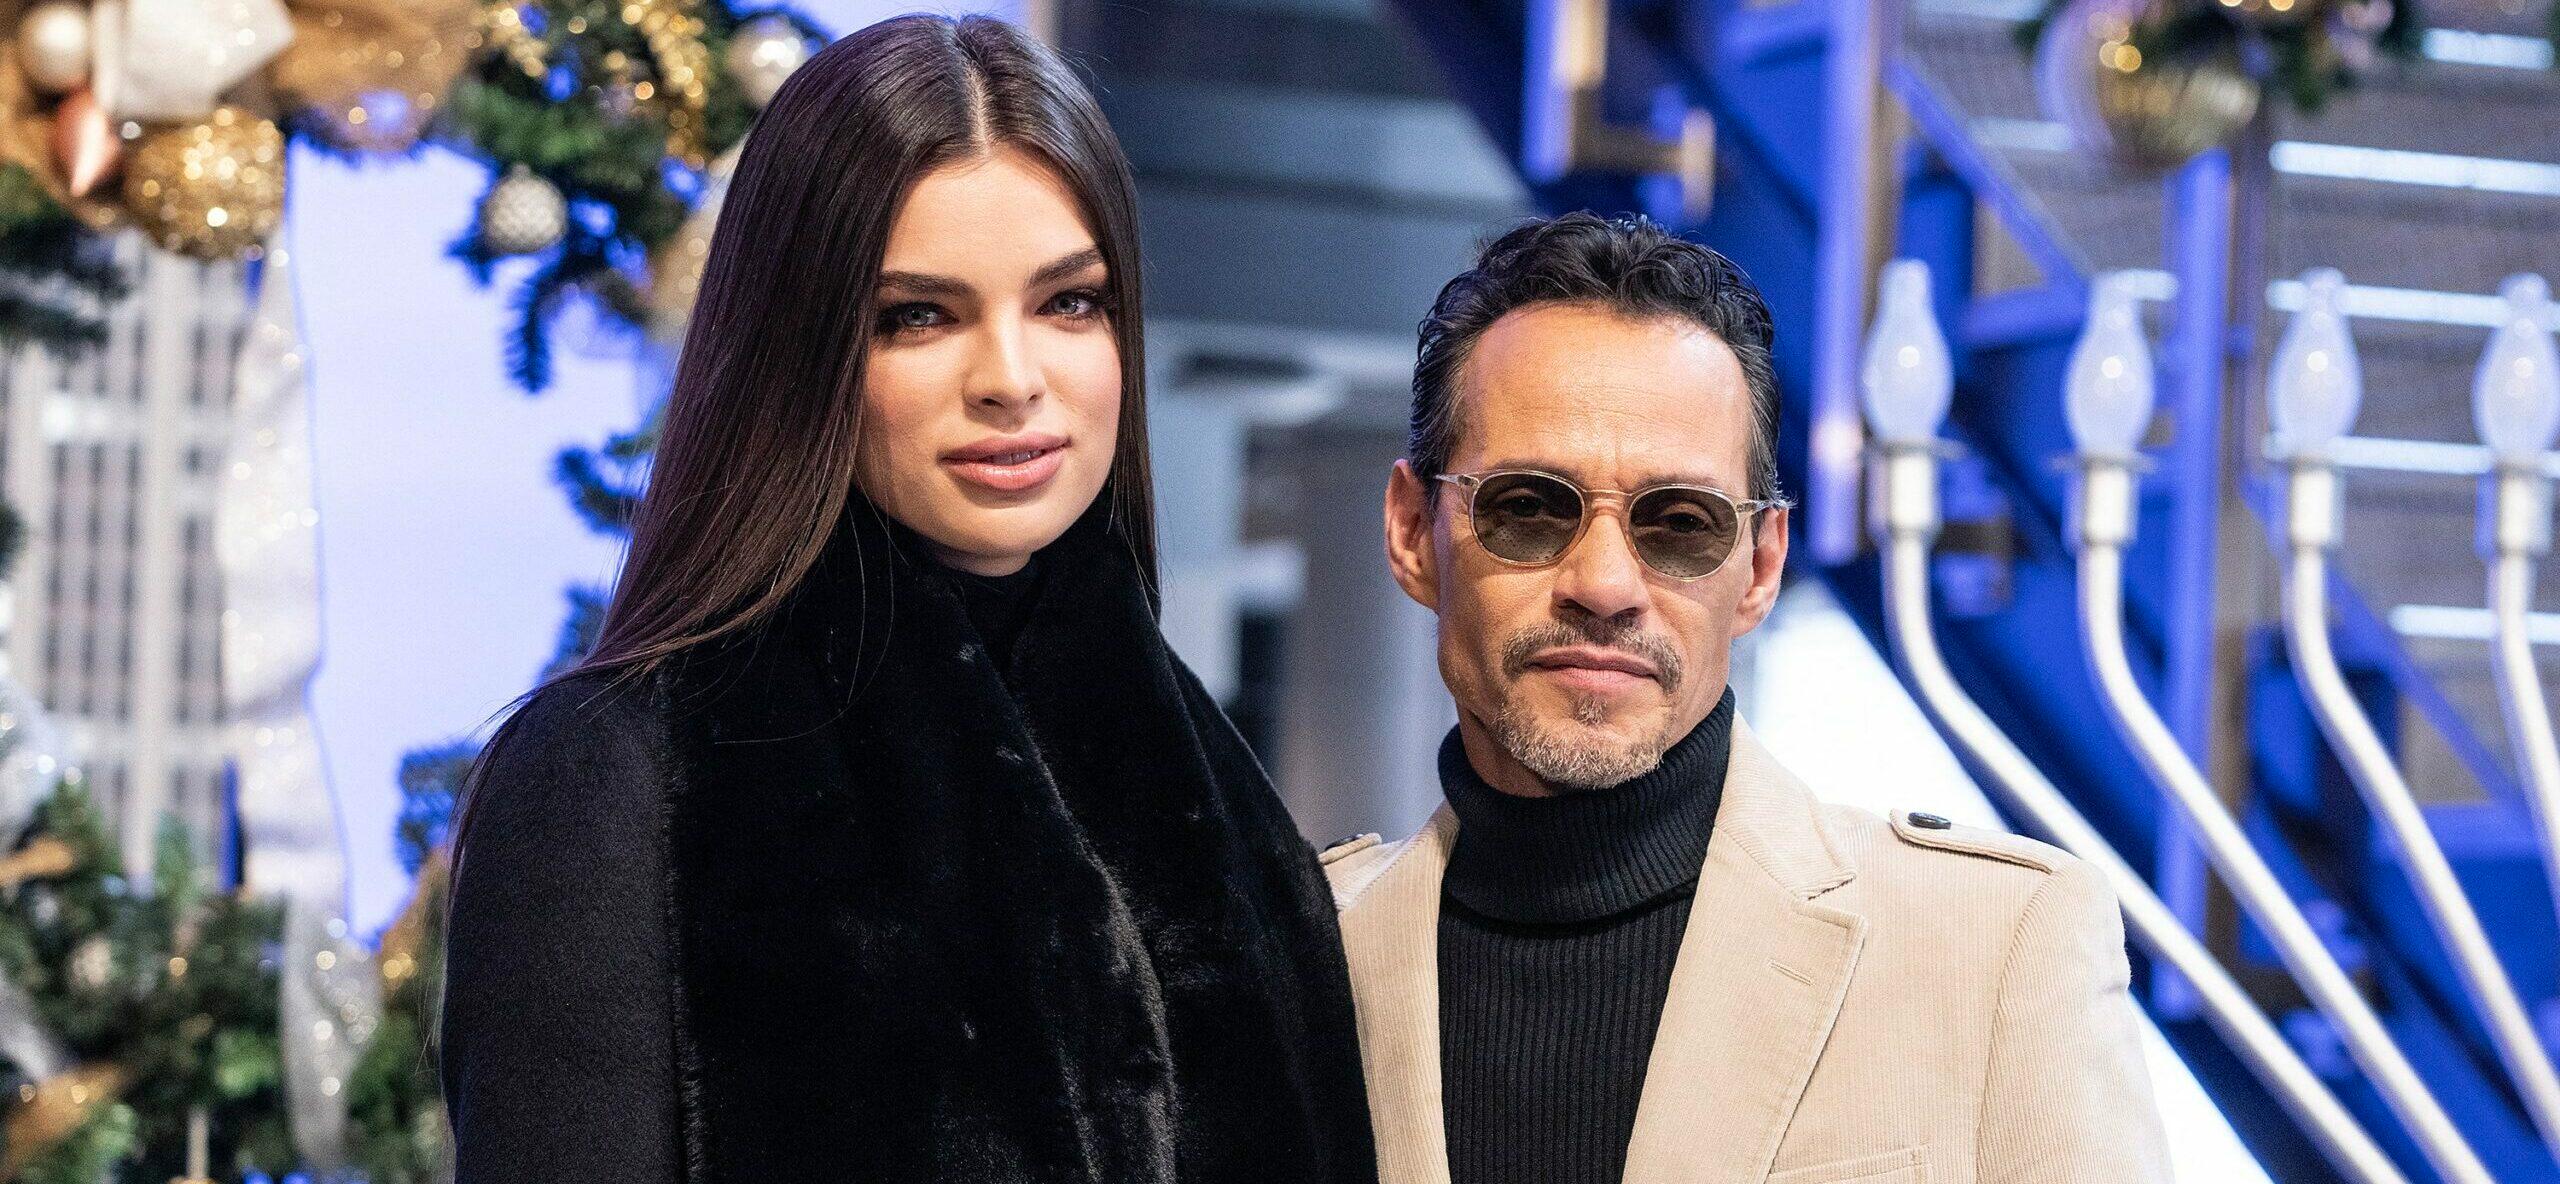 Marc Anthony & His Fourth Wife, Nadia Ferreira, Welcome Their First Child Together On Father’s Day